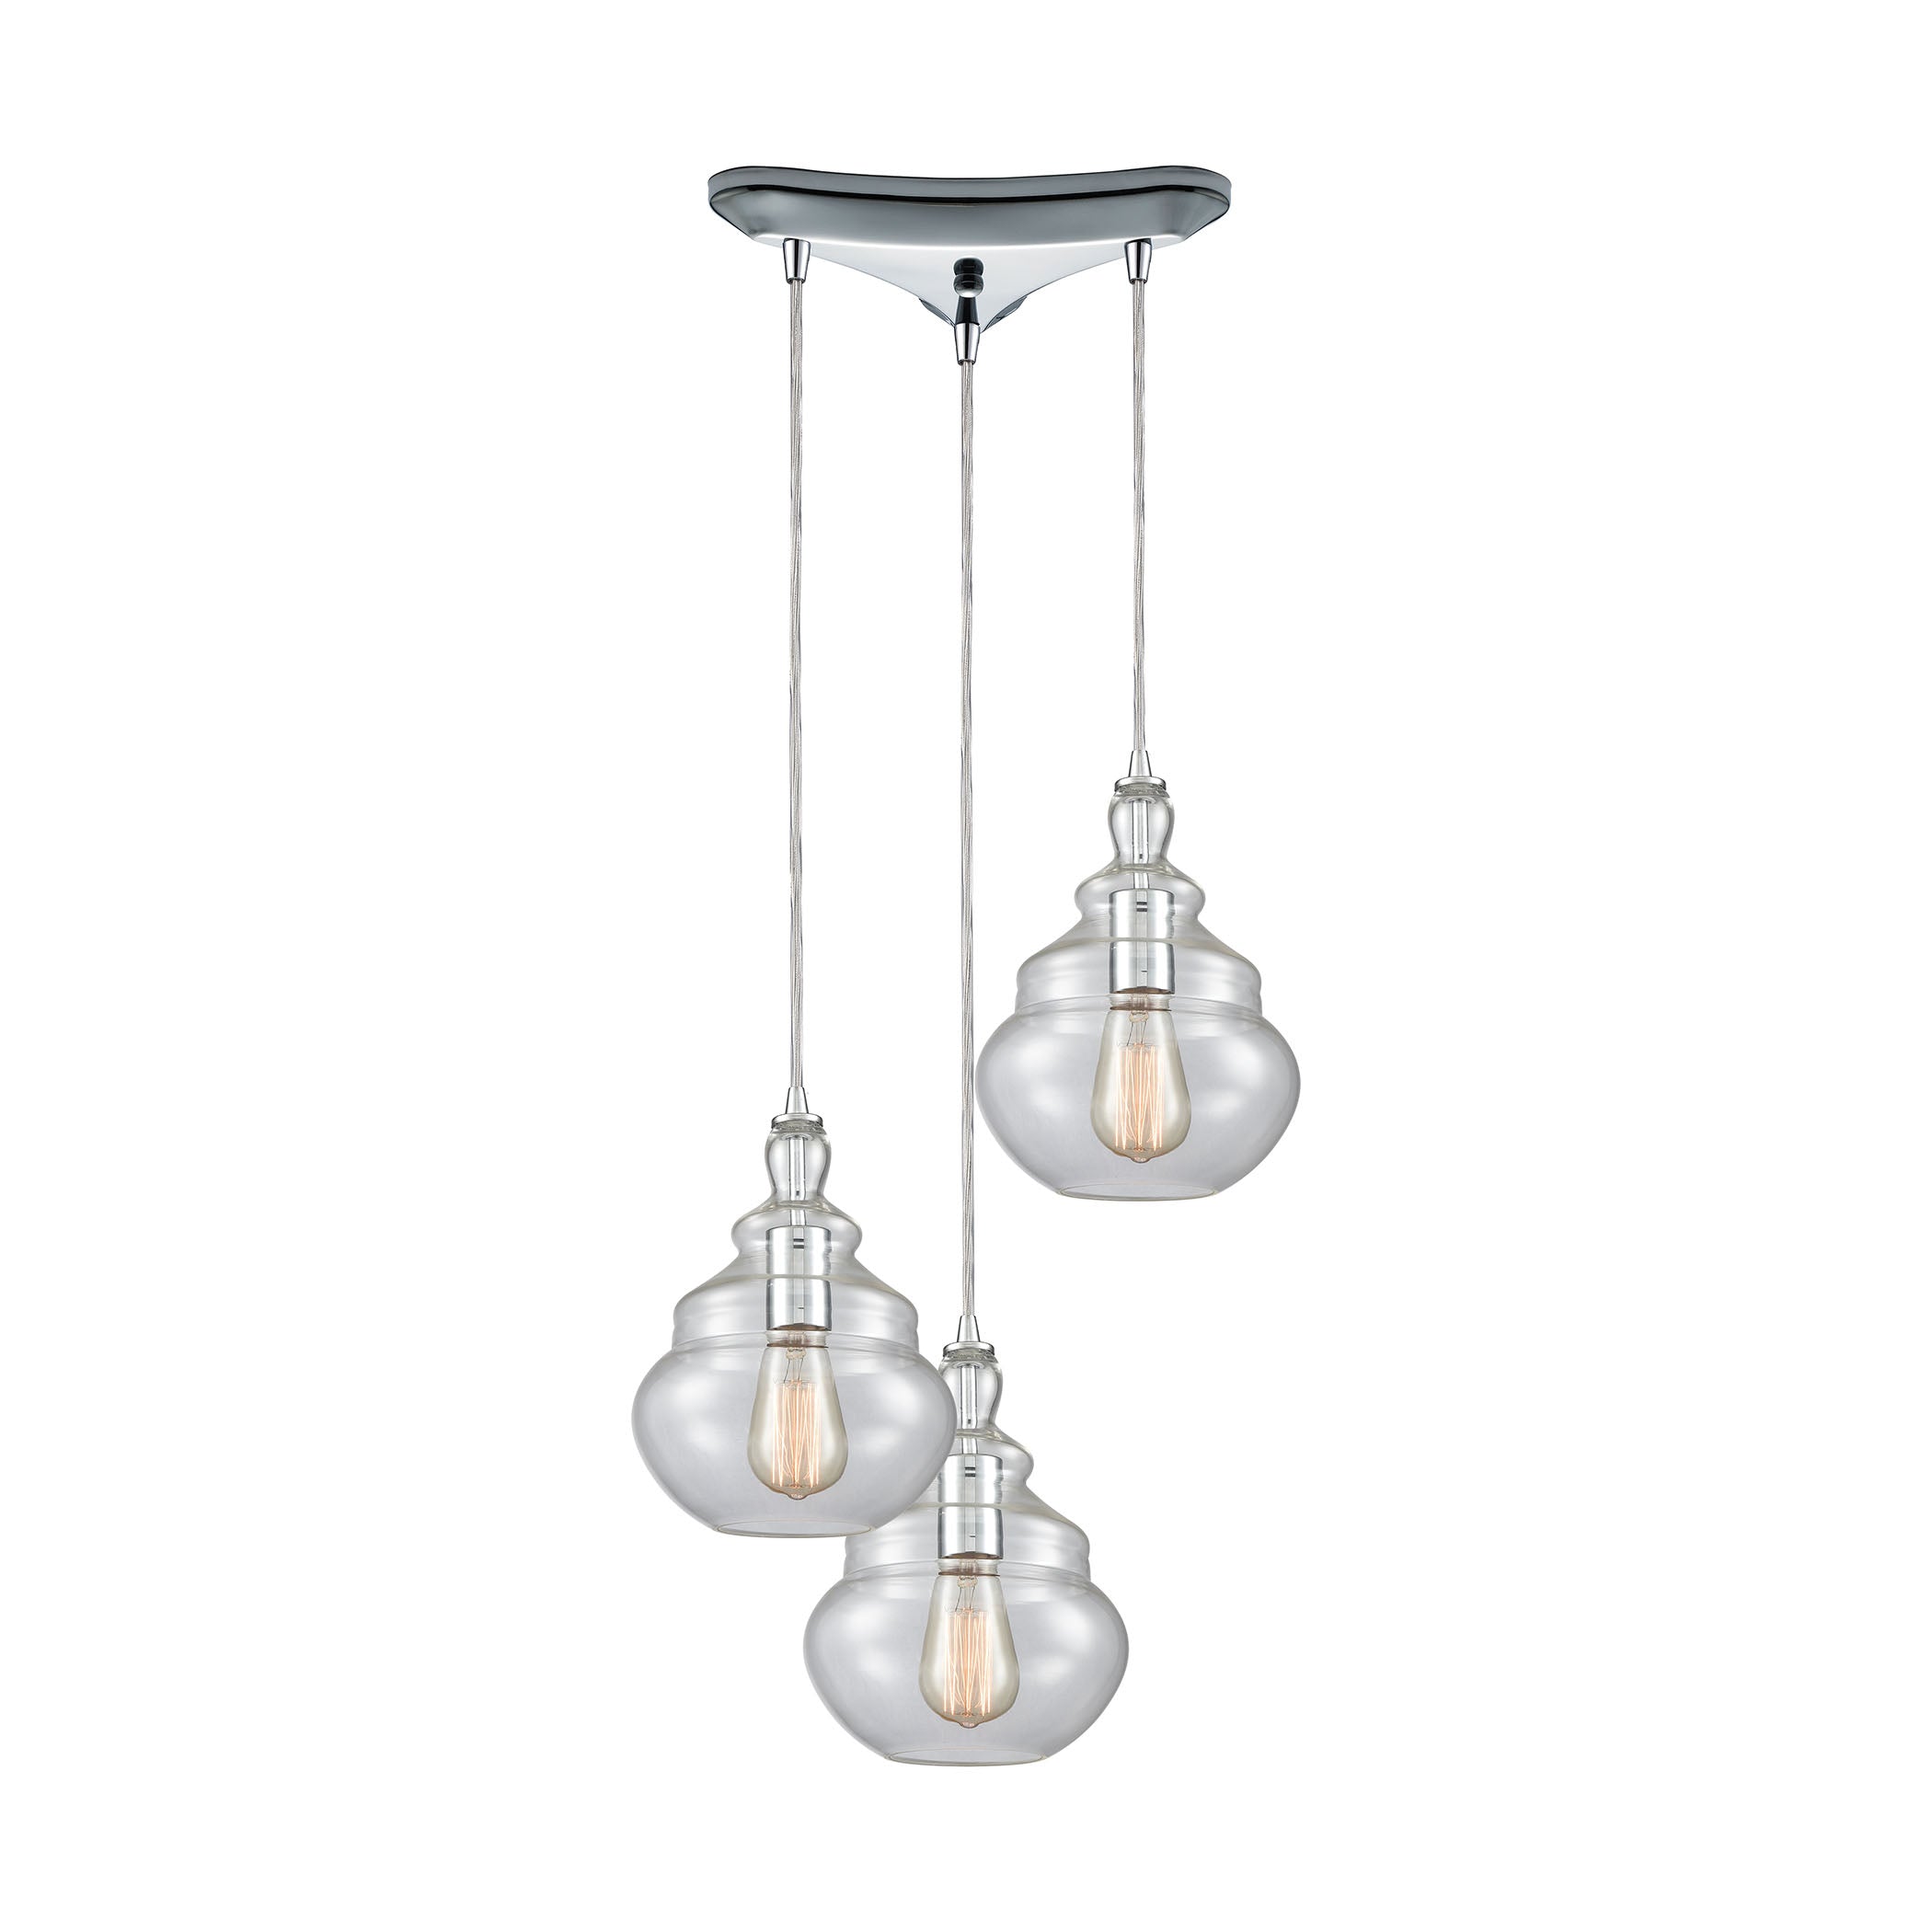 ELK Lighting 10562/3 Tabor 3-Light Triangular Pendant Fixture in Polished Chrome with Clear Glass